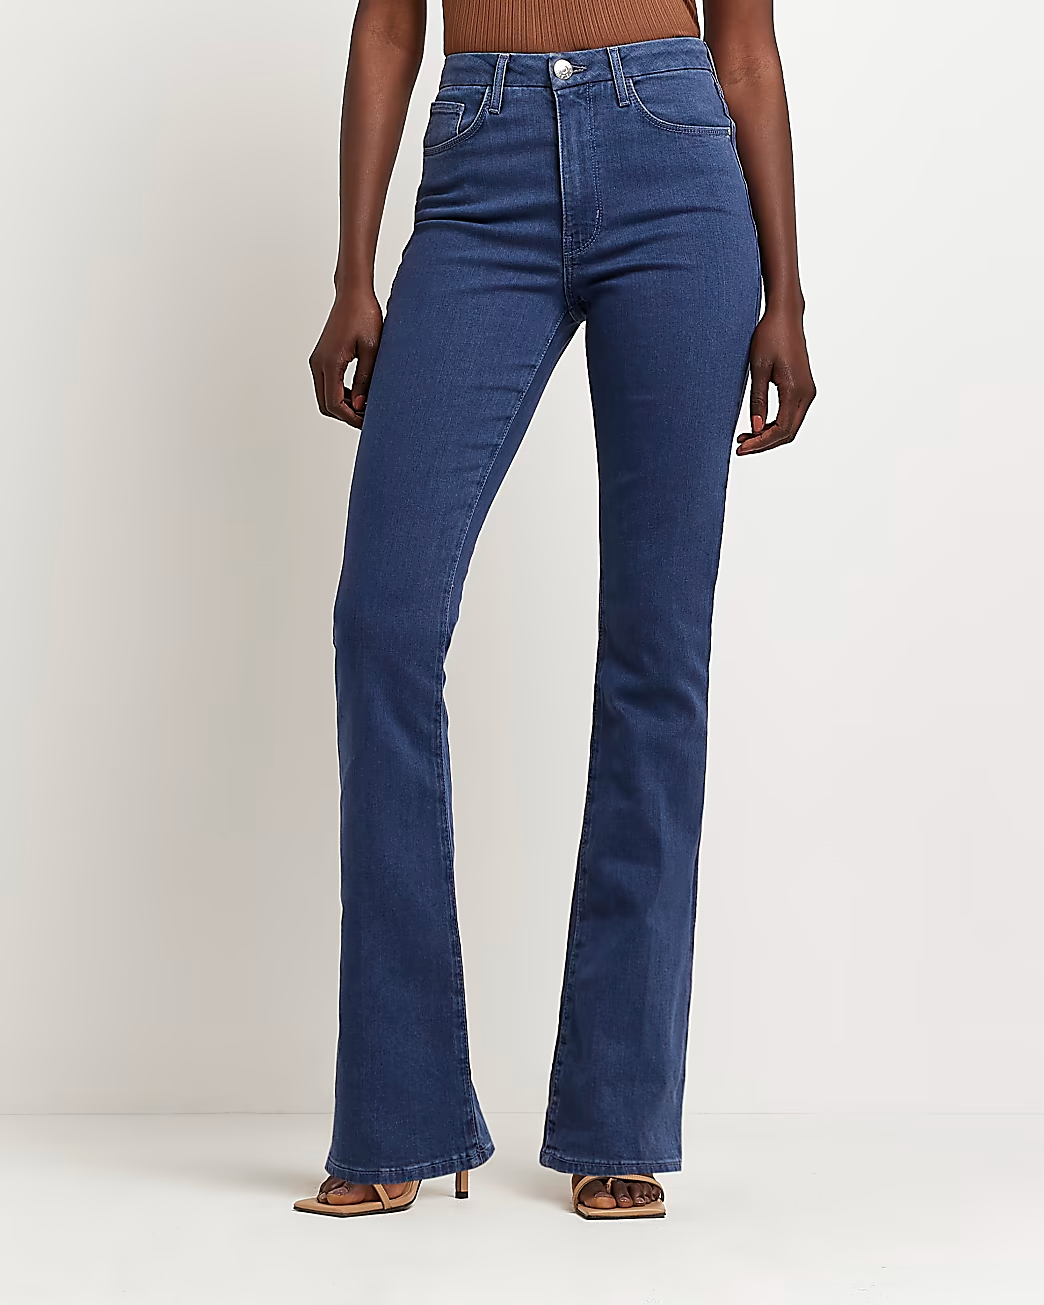 Perfect Jeans for Every Shape - Find Yours!